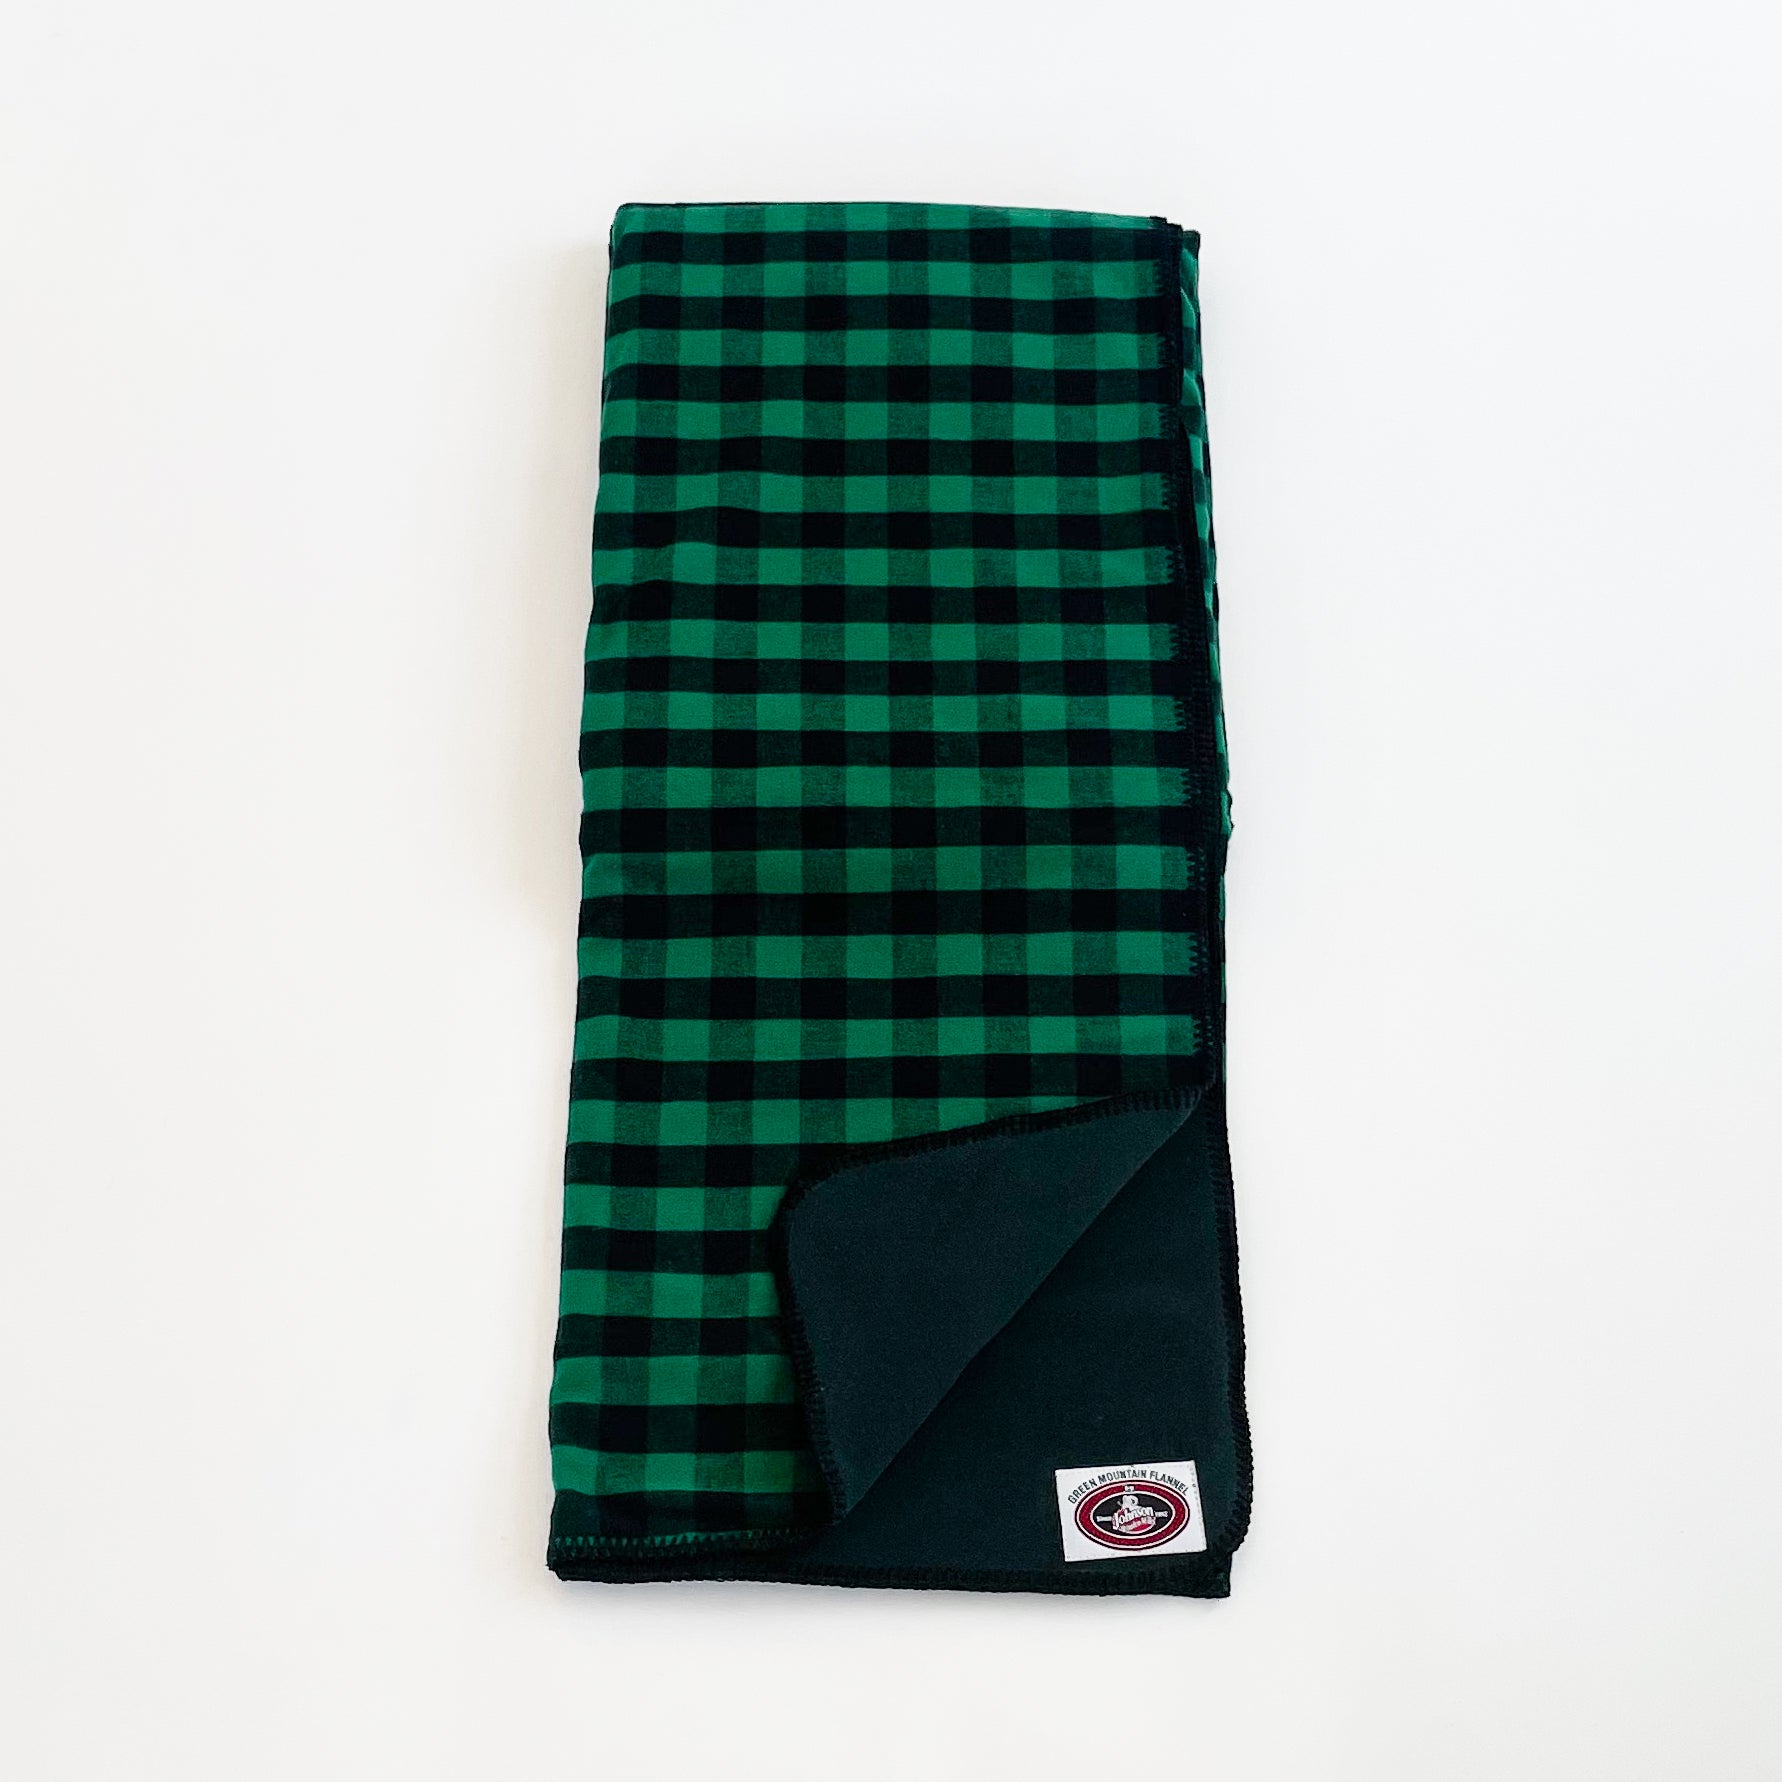 Green Mountain Flannel Throw Green & Black 1 inch buffalo squares with black fleece lining open corner view